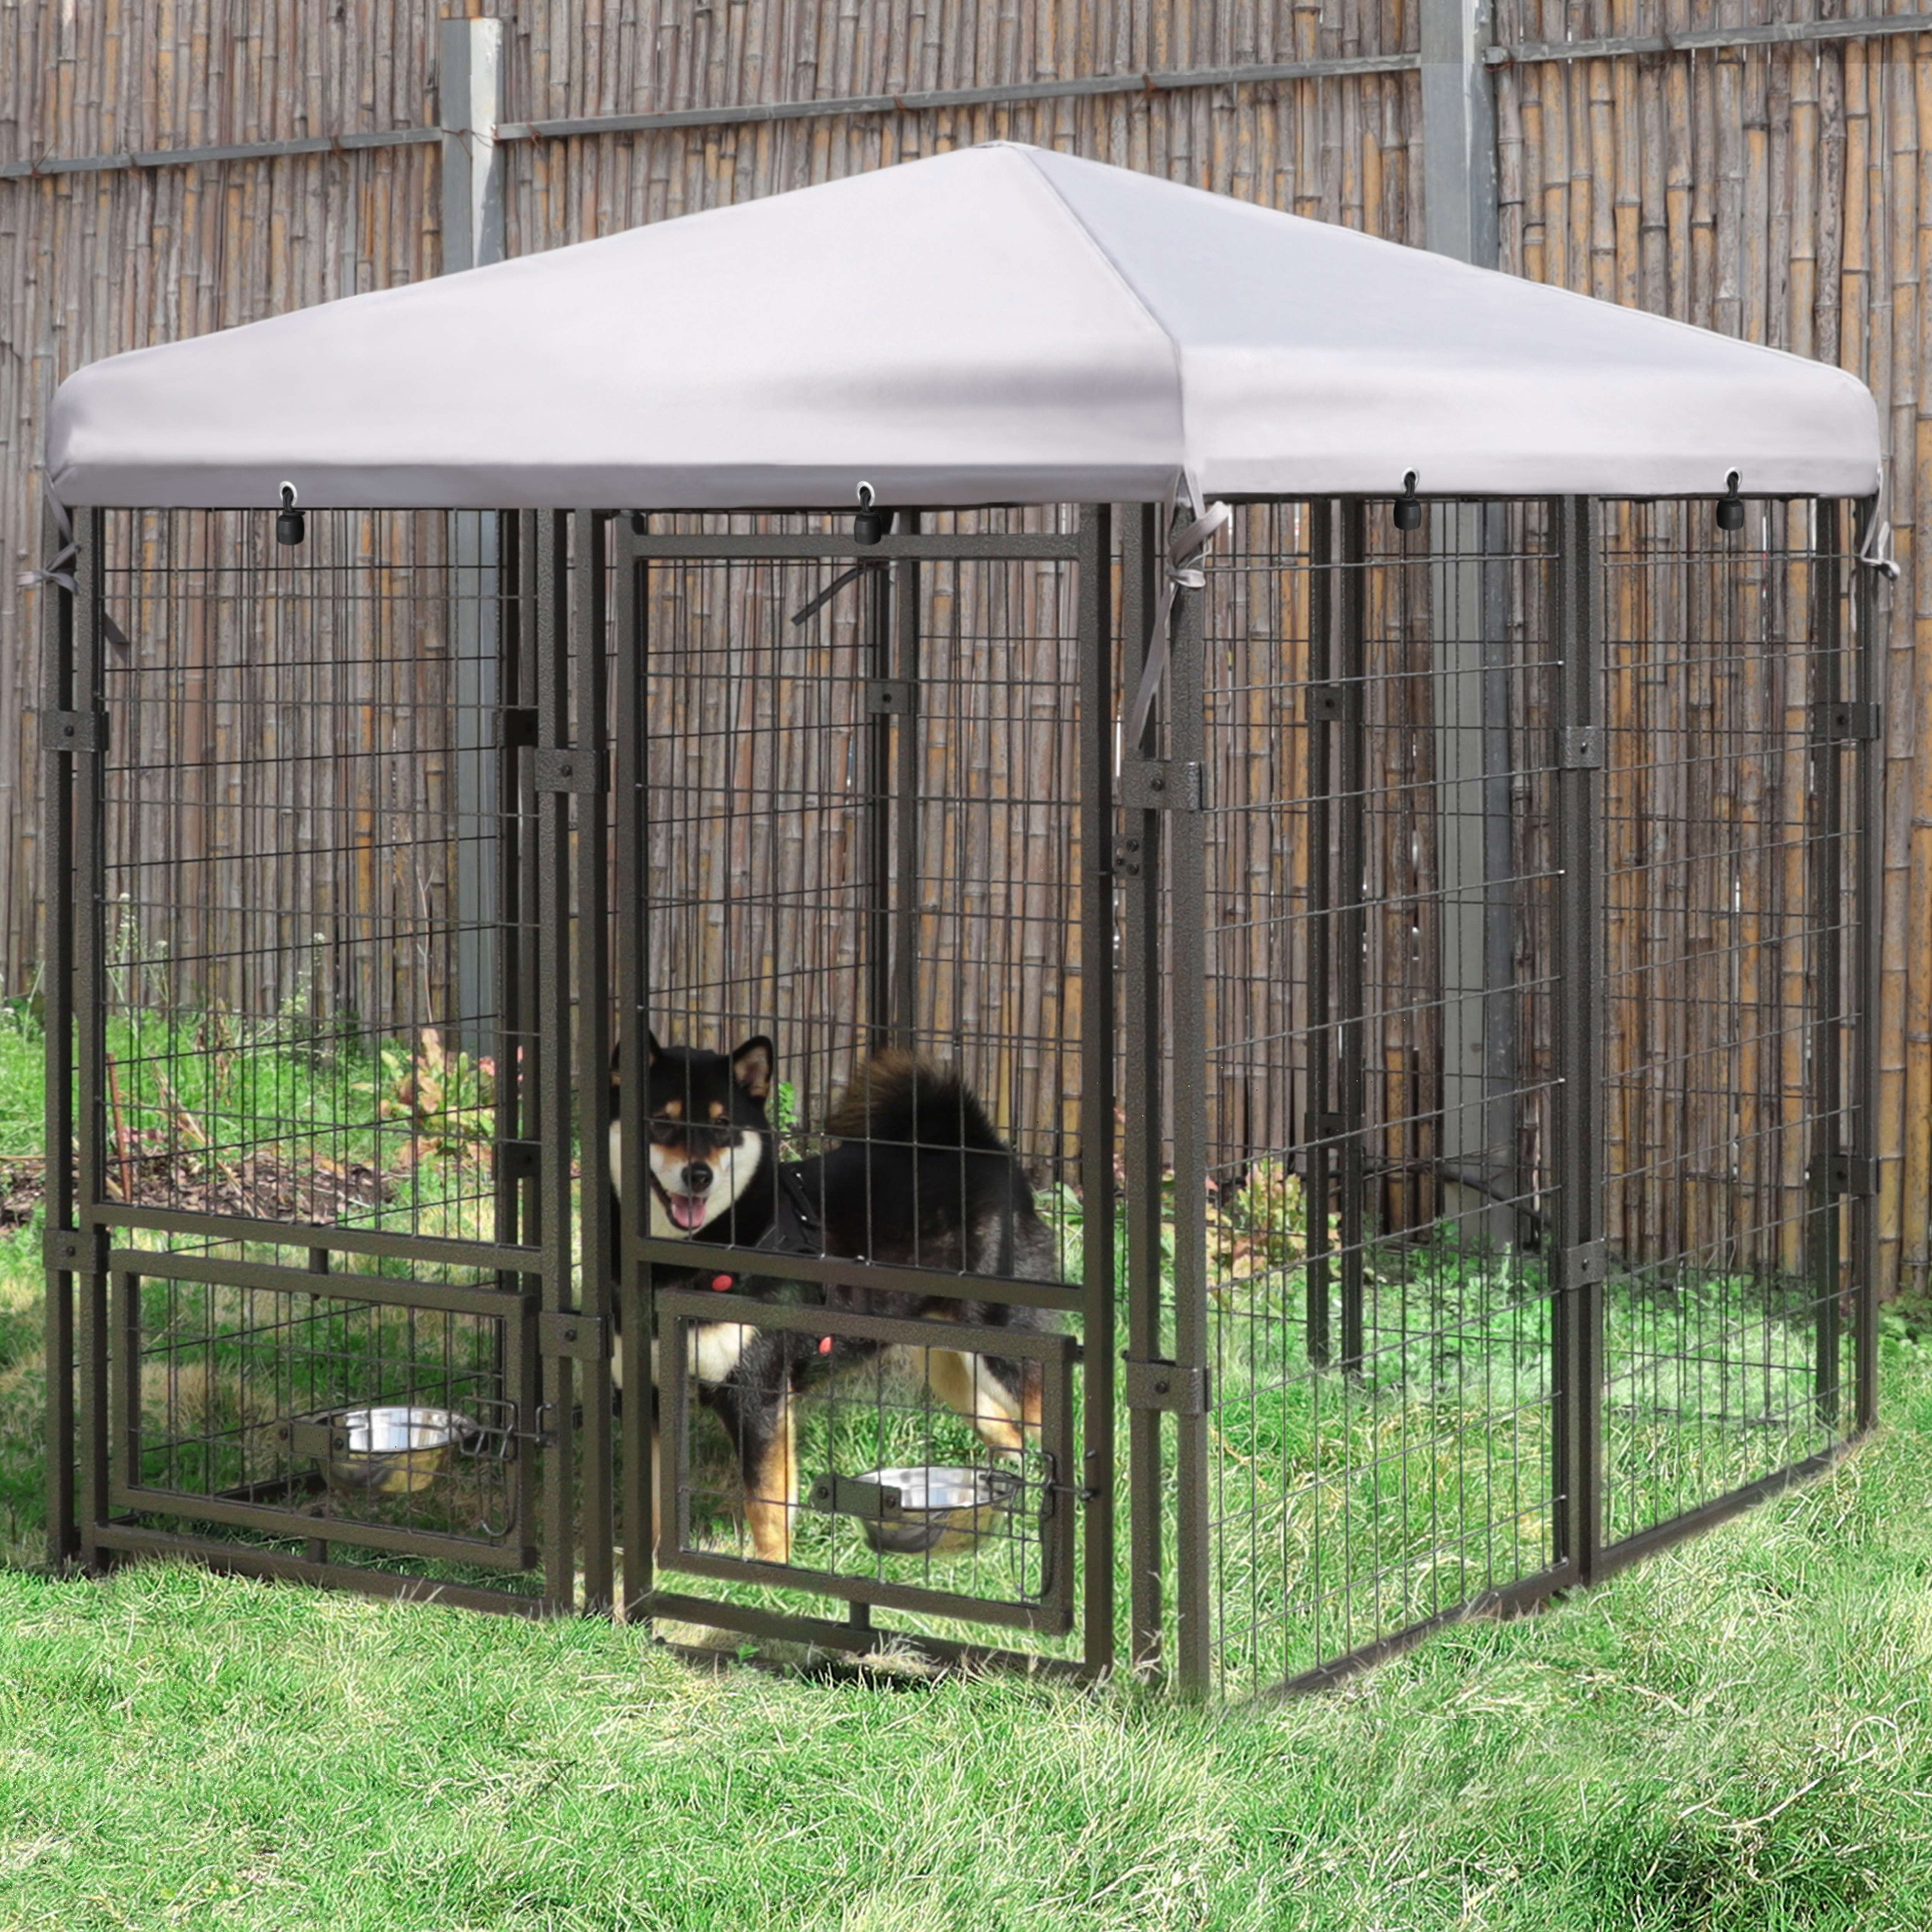 

Heavy-duty Dog Cage Kennel With Powder-coated Steel Frame, Rotating Feeding Door, Upgraded Canopy Shelter, Outdoor Pet House